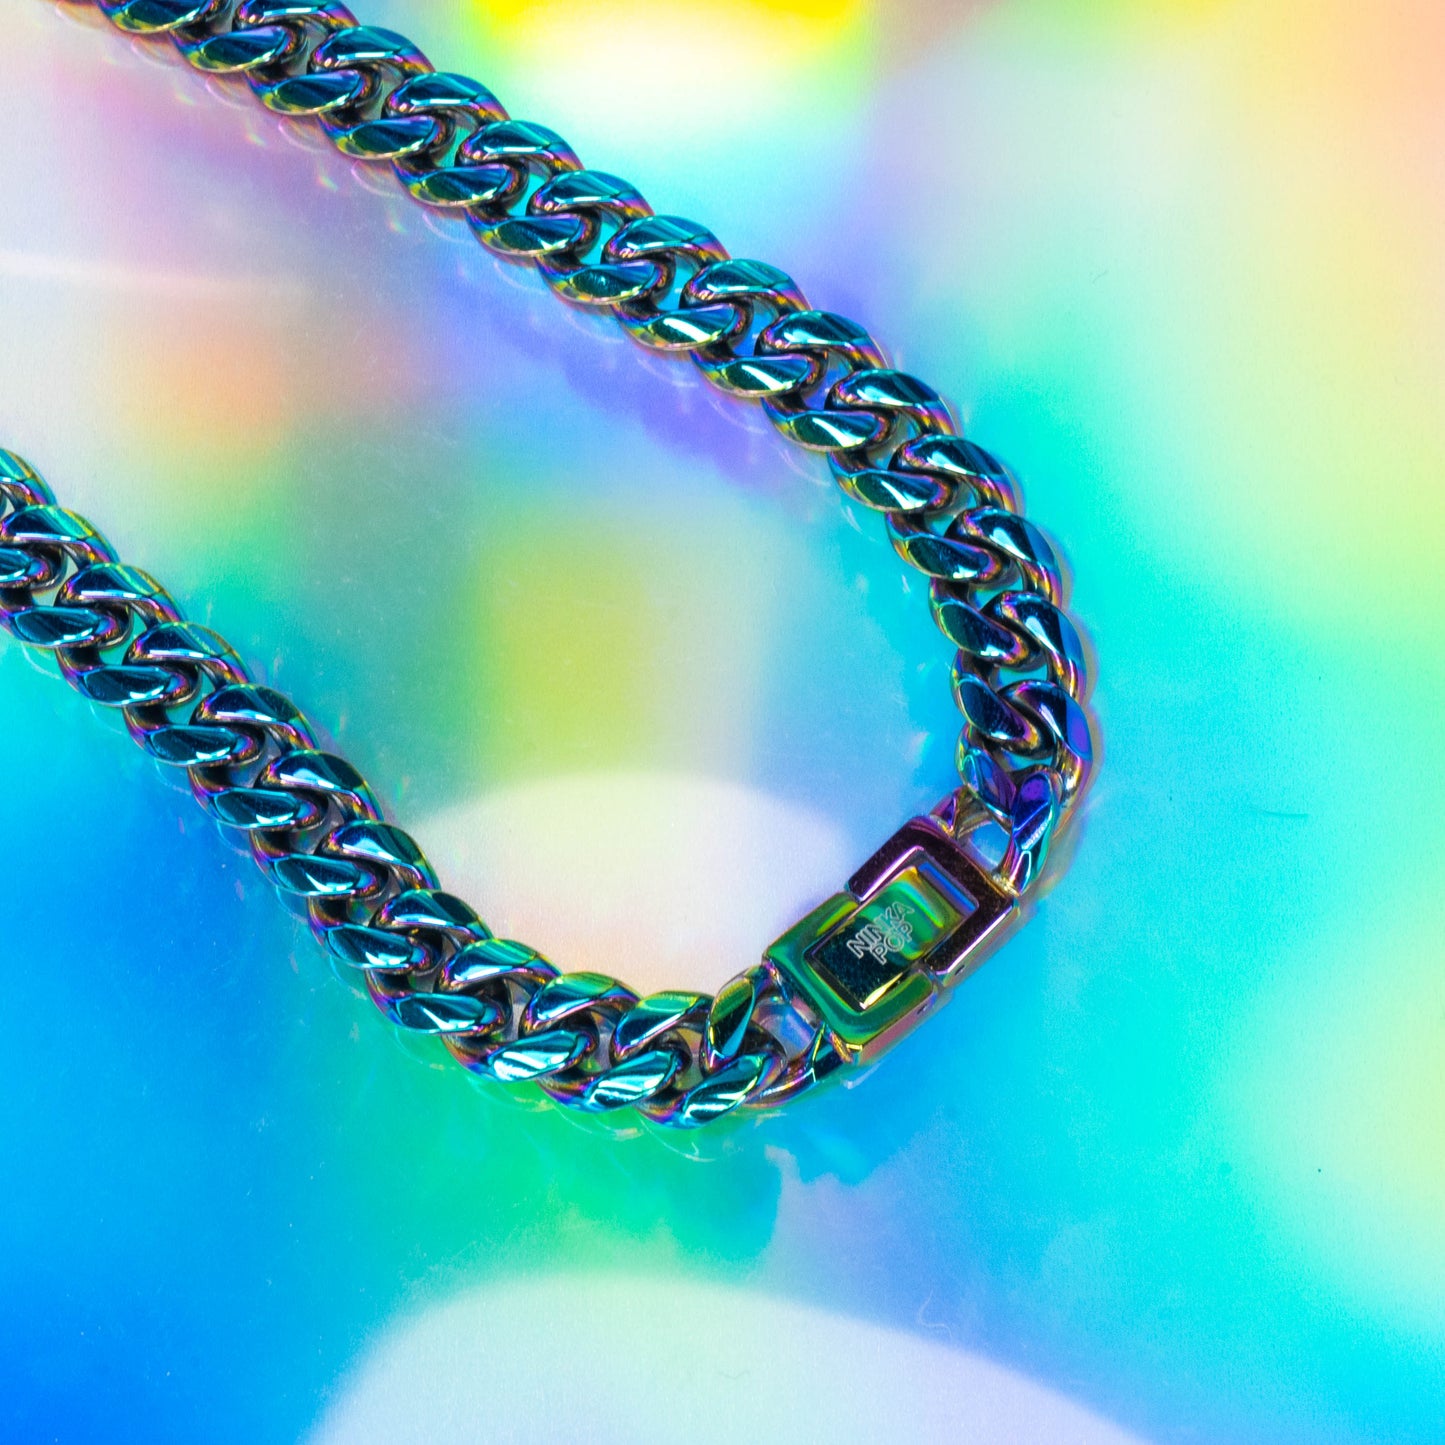 Rainbow stainless steel chain necklace